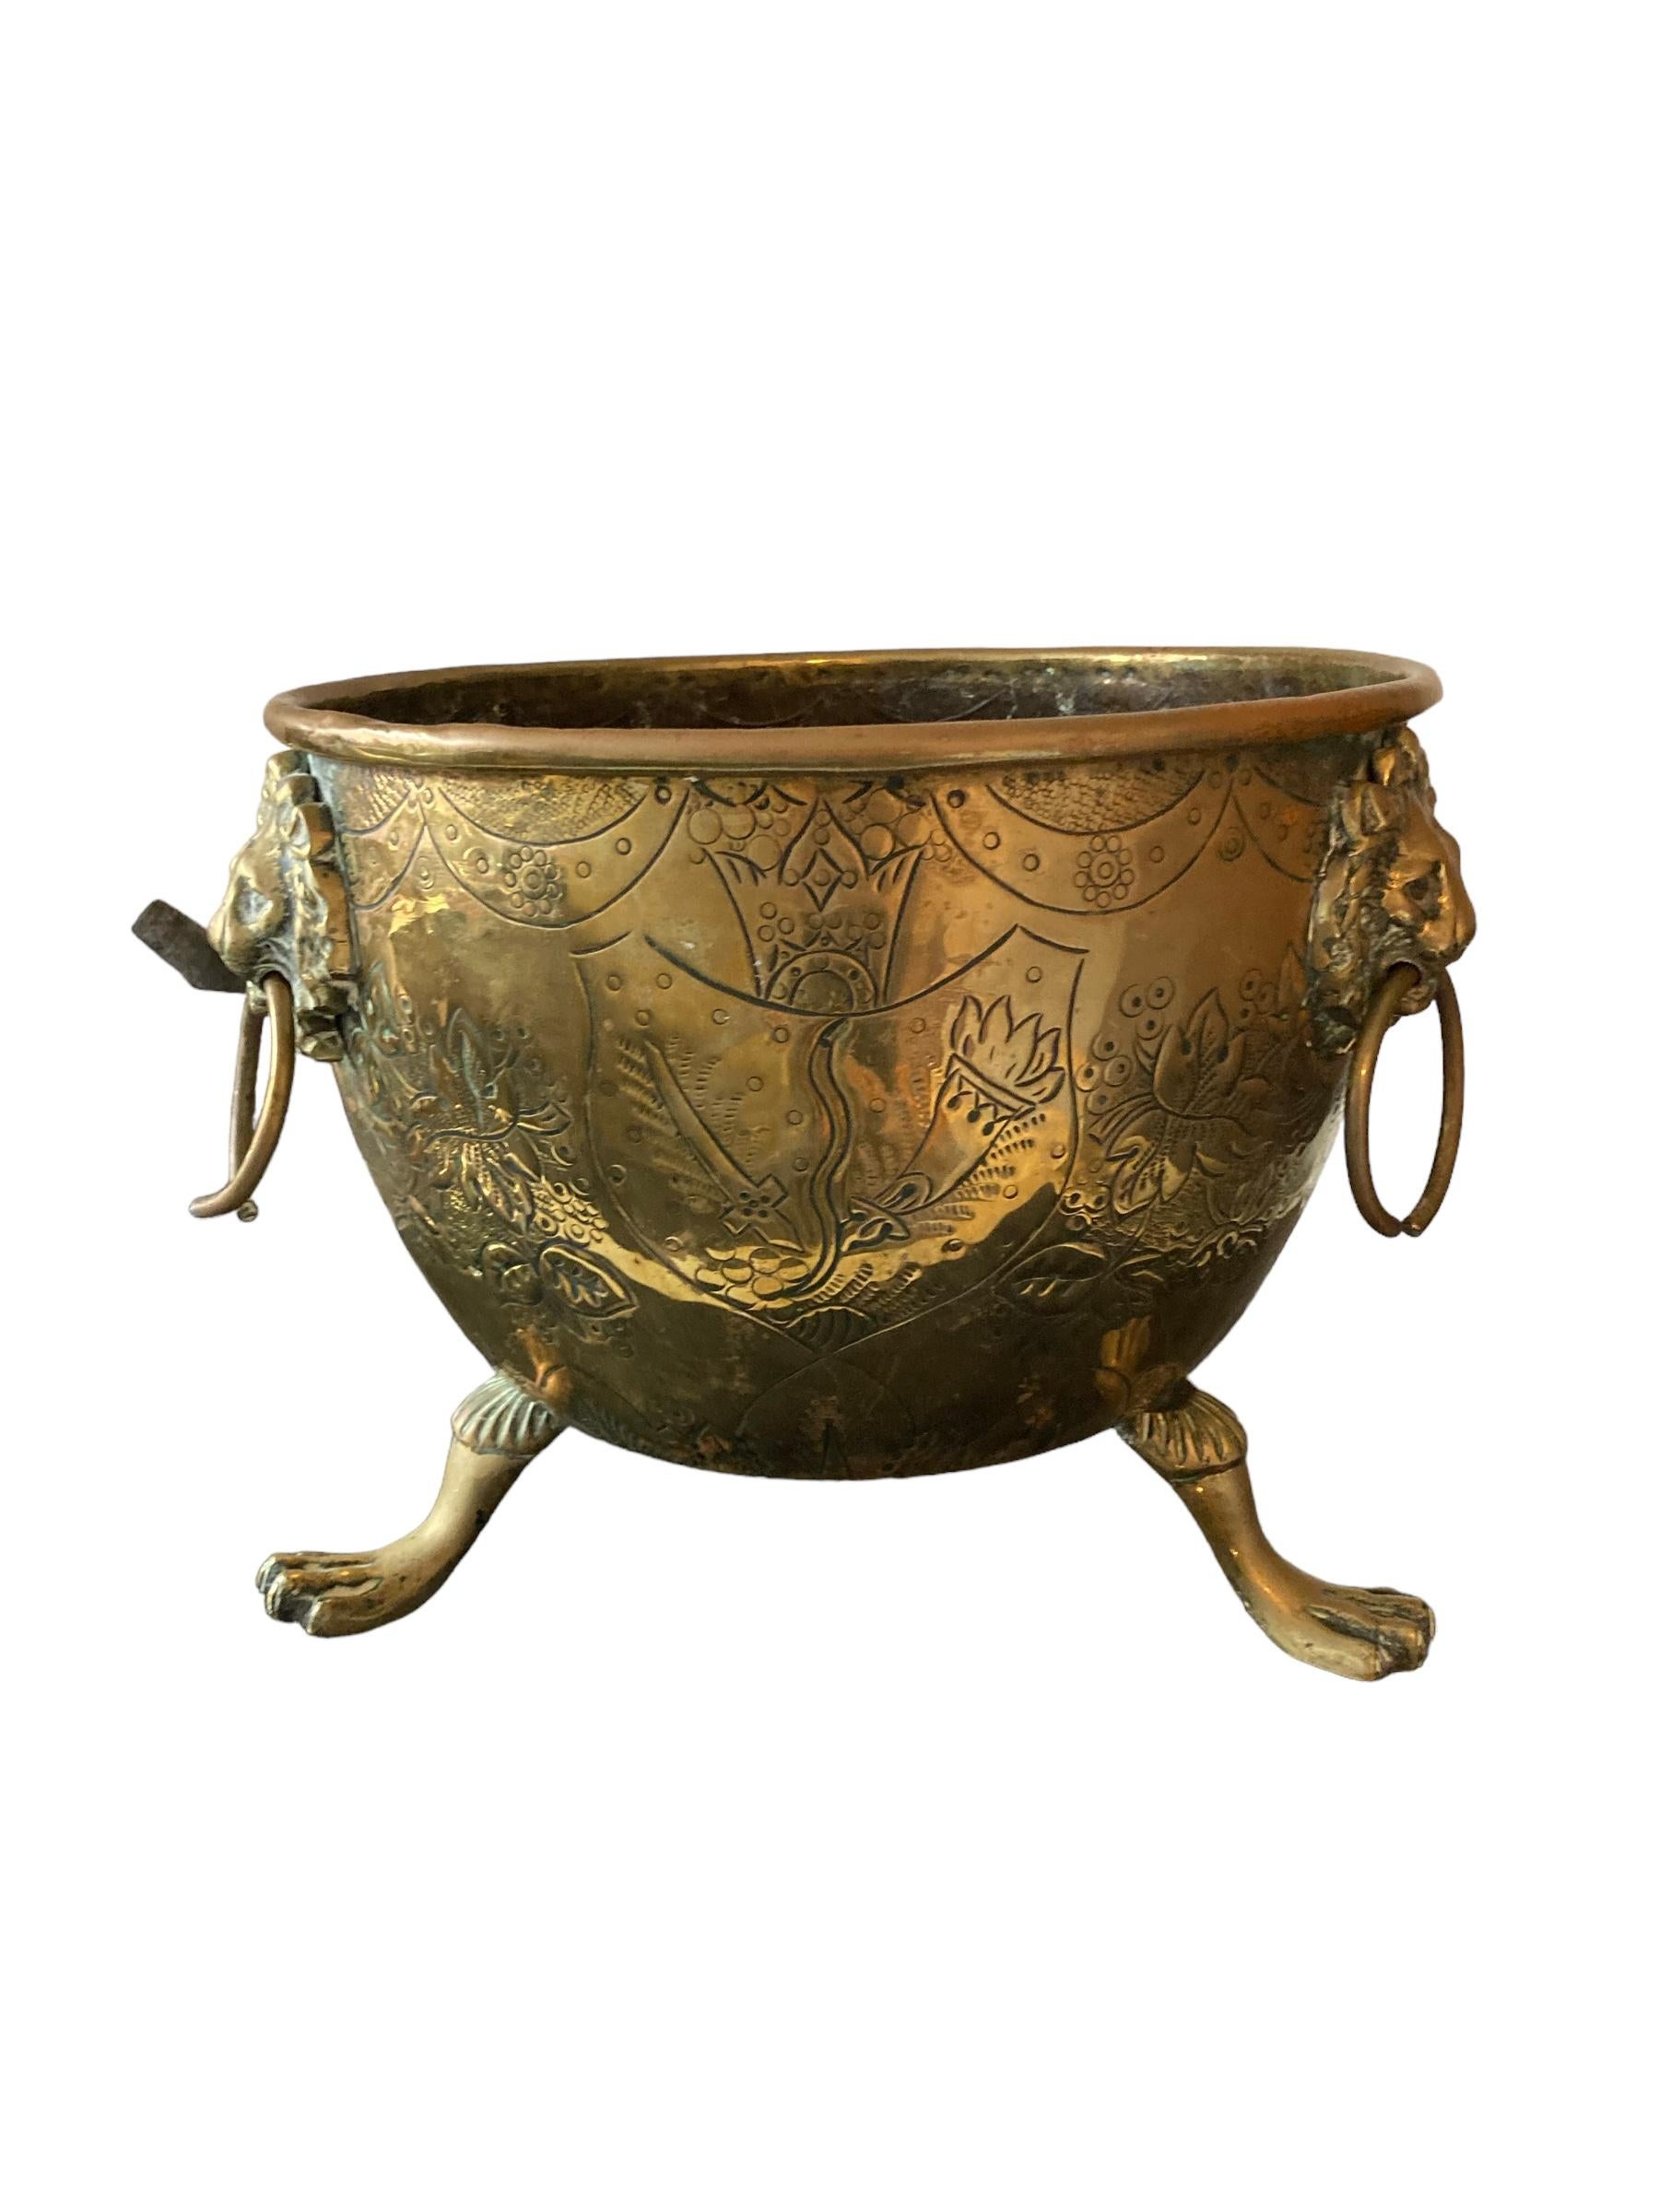 Brass coal scuttle, fire side bucket, Lion Paw Tri feet and Lion Head Handle. Ornate decorative engravings. Mid to late Late 19th Century dating around 1850.
H: 27 cm
W: 34 cm
D: 34 cm